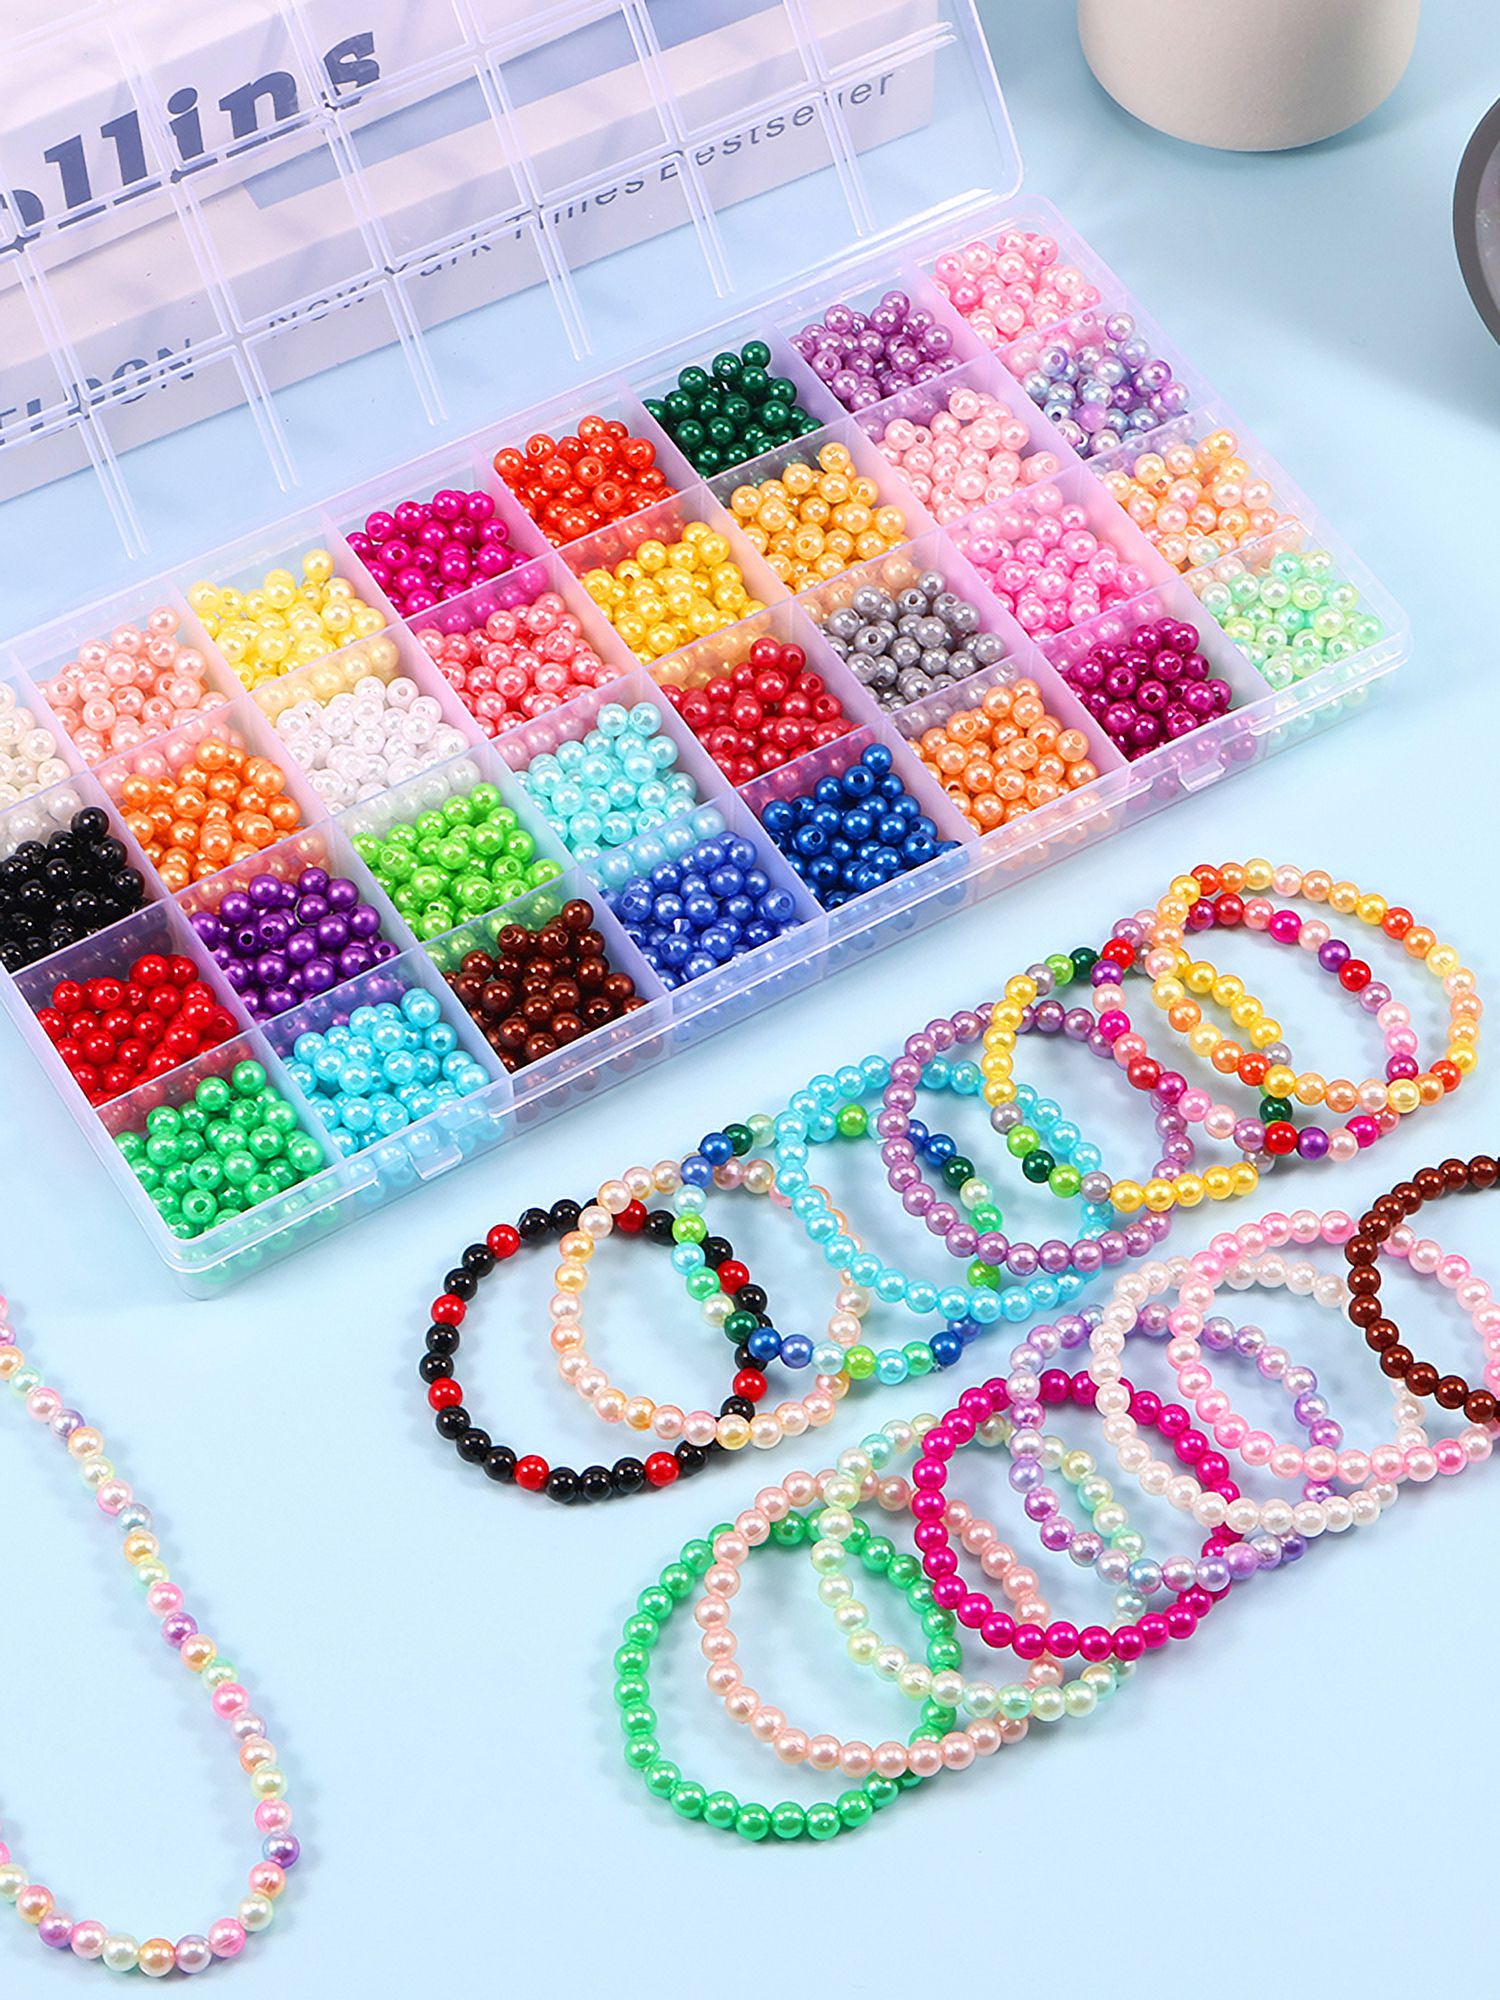 Urvrriu 1920pcs 6mm Bracelet Beads Kit 32 Colors Round Imitation Pearls Multicolor Loose Beads DIY Bracelets Necklace Beads Set with Storage Box for Earrings